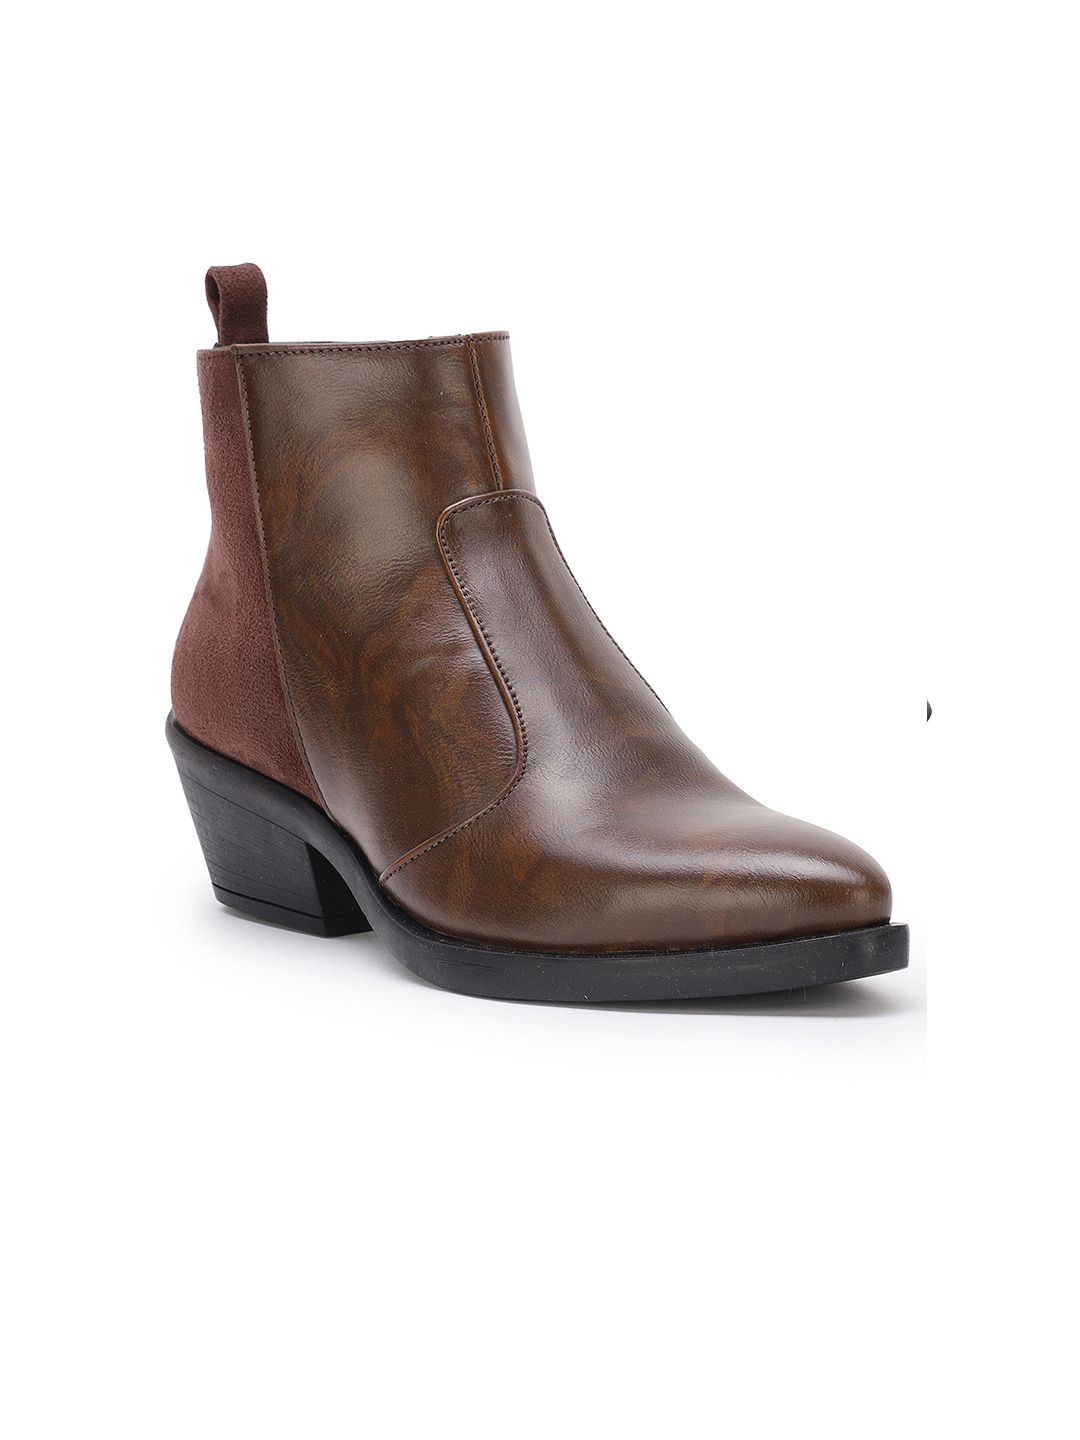 Bruno Manetti Women Brown Solid High-Top Heeled Boots Price in India